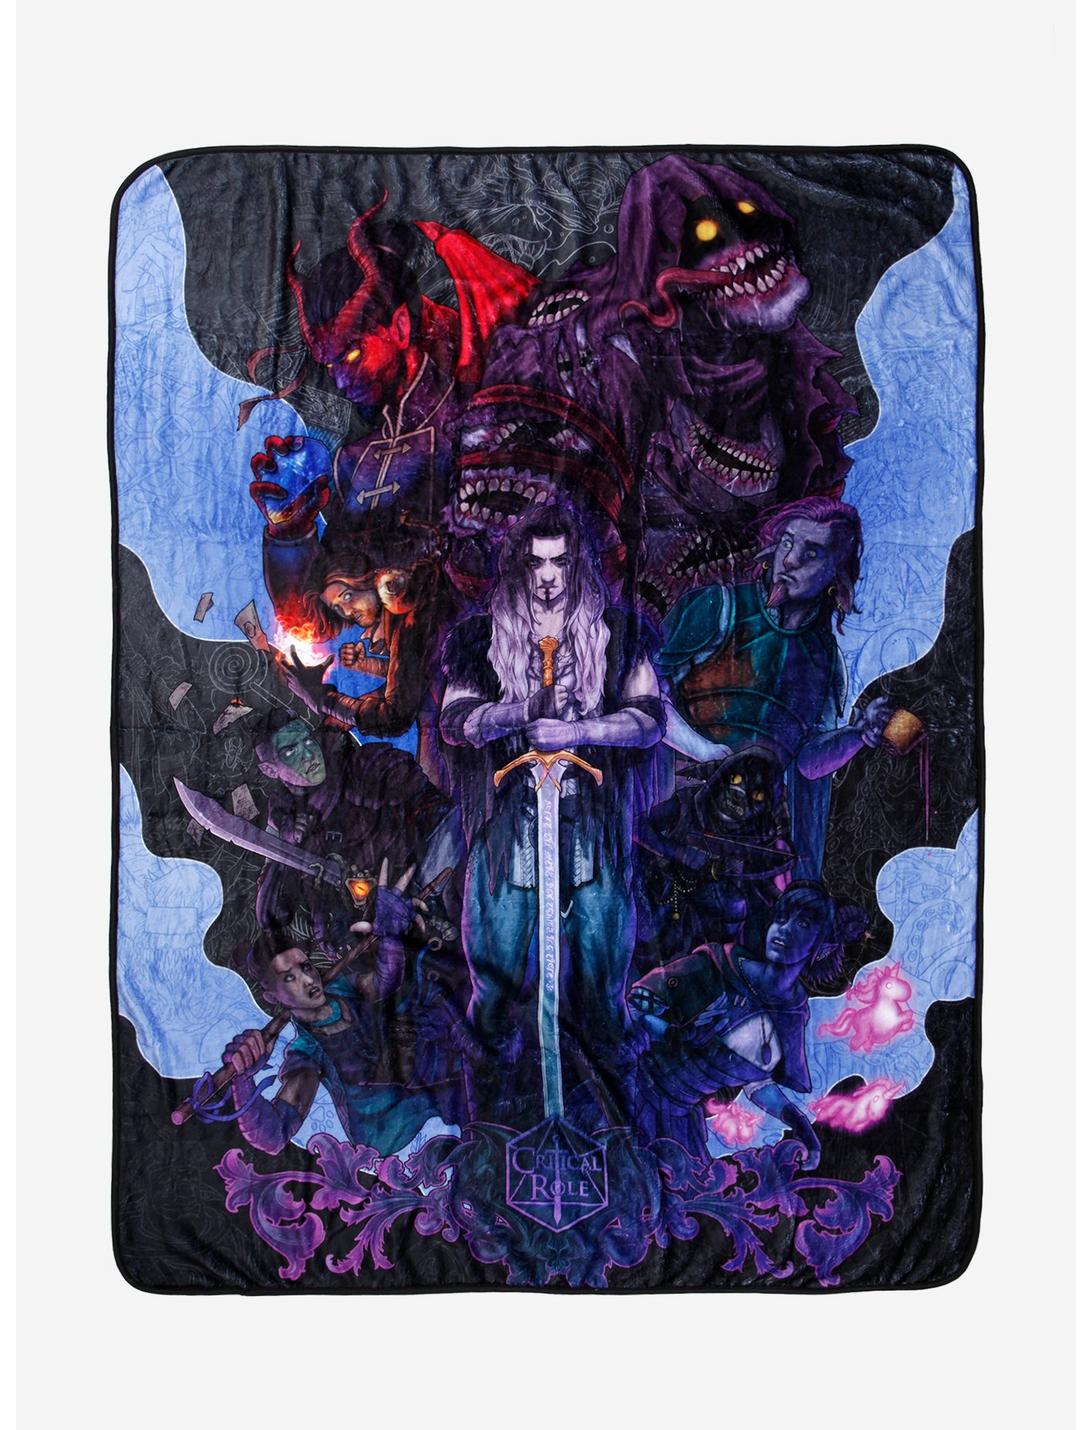 Dungeons & Dragons Plush Fleece Gift Throw Blanket Critical Role 45 X 60 New